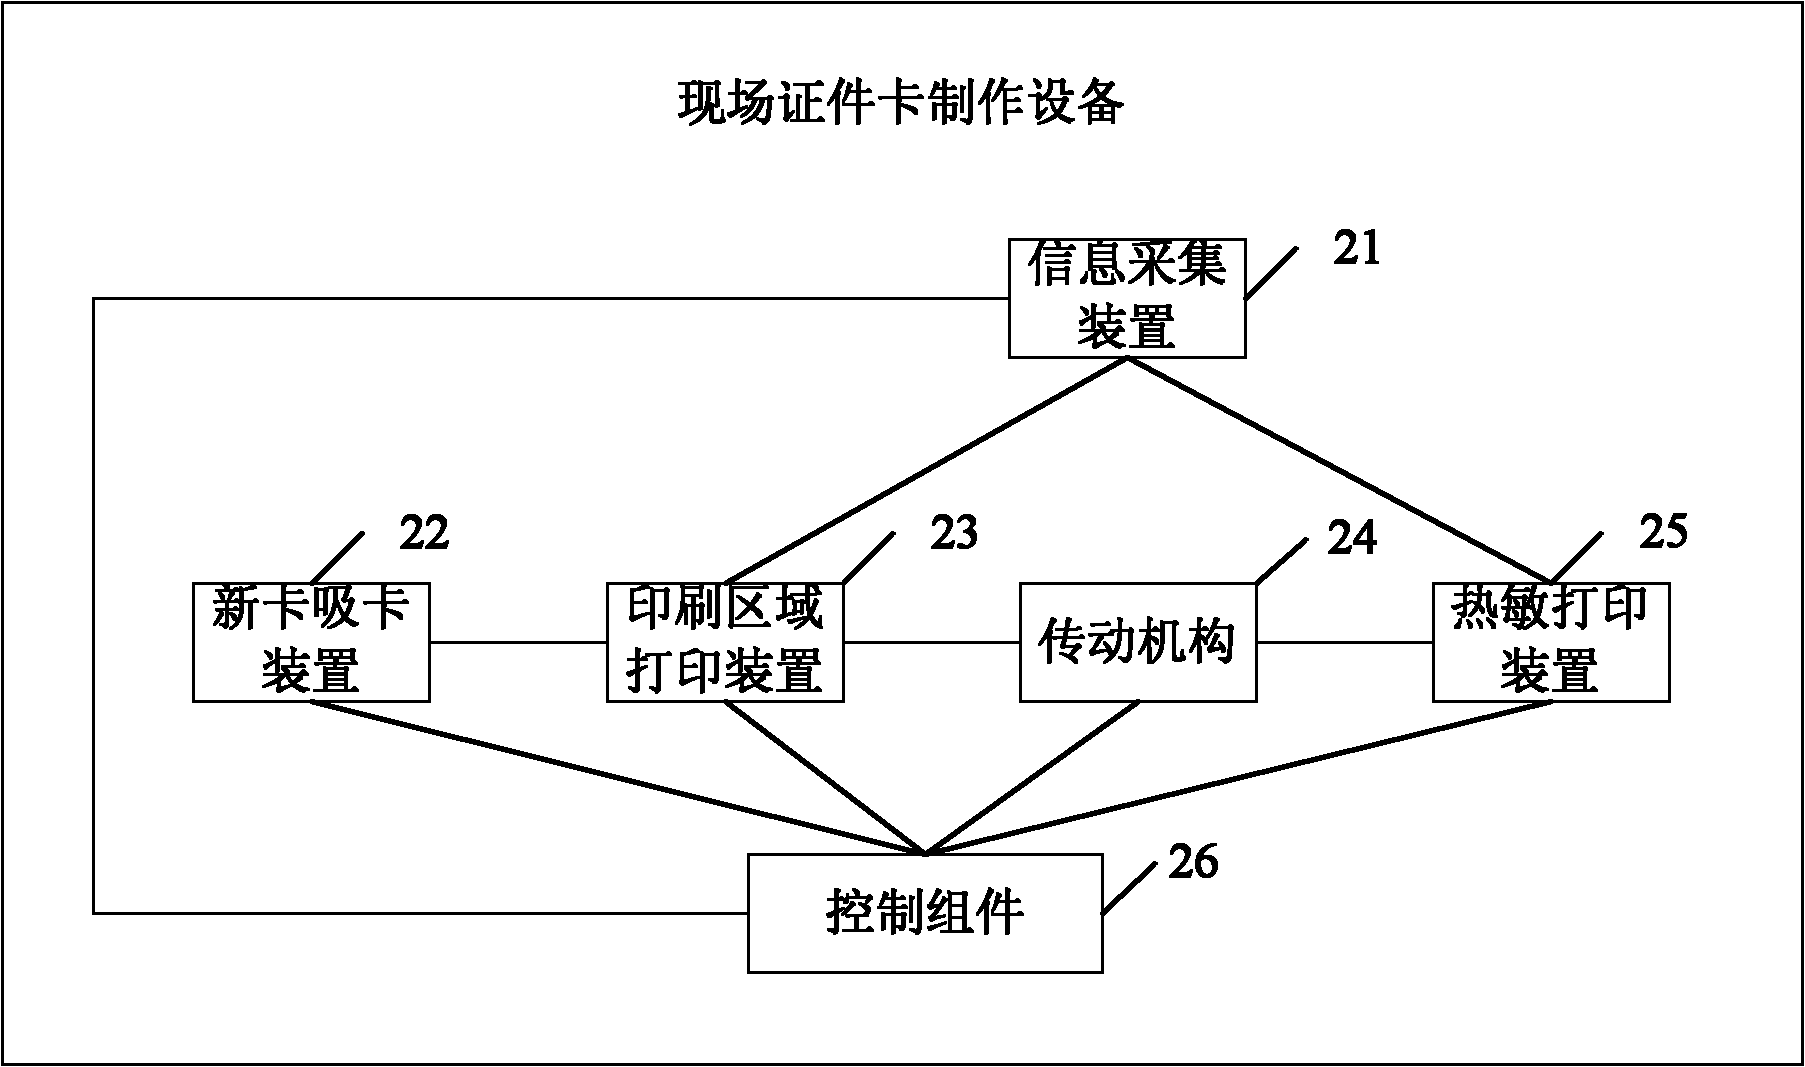 On-site certificate card manufacturing equipment and method